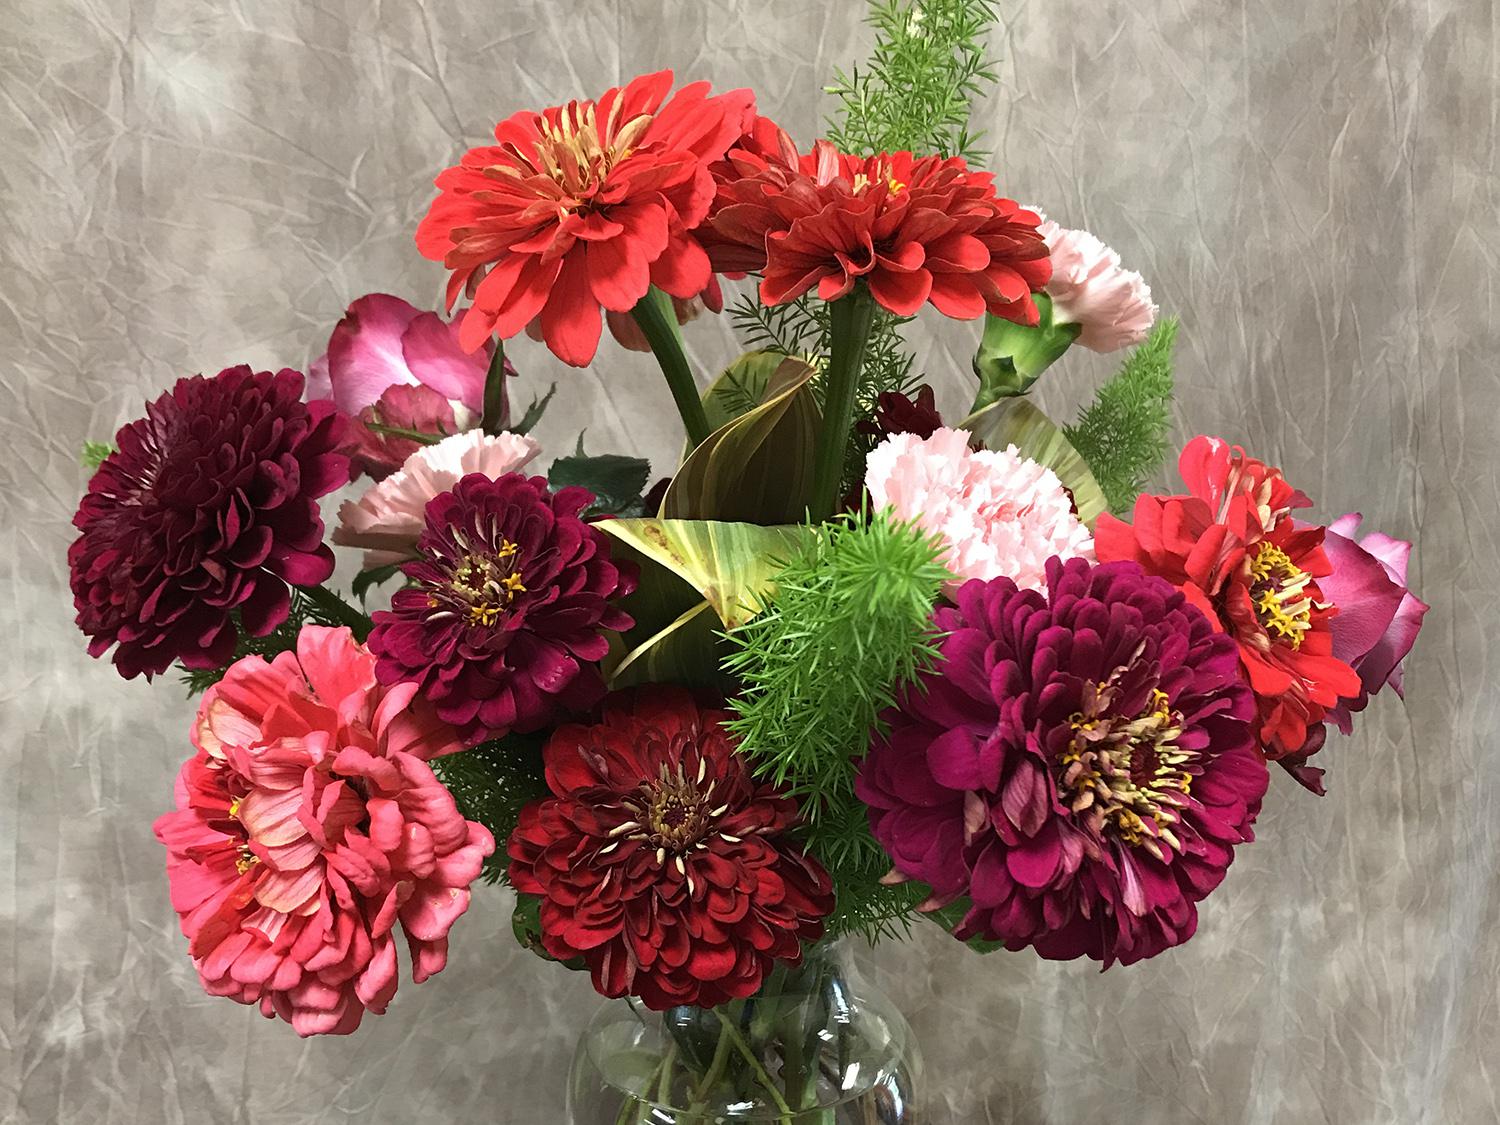 Jim DelPrince, Mississippi State University Extension Service floral specialist, will teach professional florists and entrepreneurs how to design for weddings during a workshop on Aug. 7 and 8. (Photo by MSU Extension Service/Jim DelPrince)